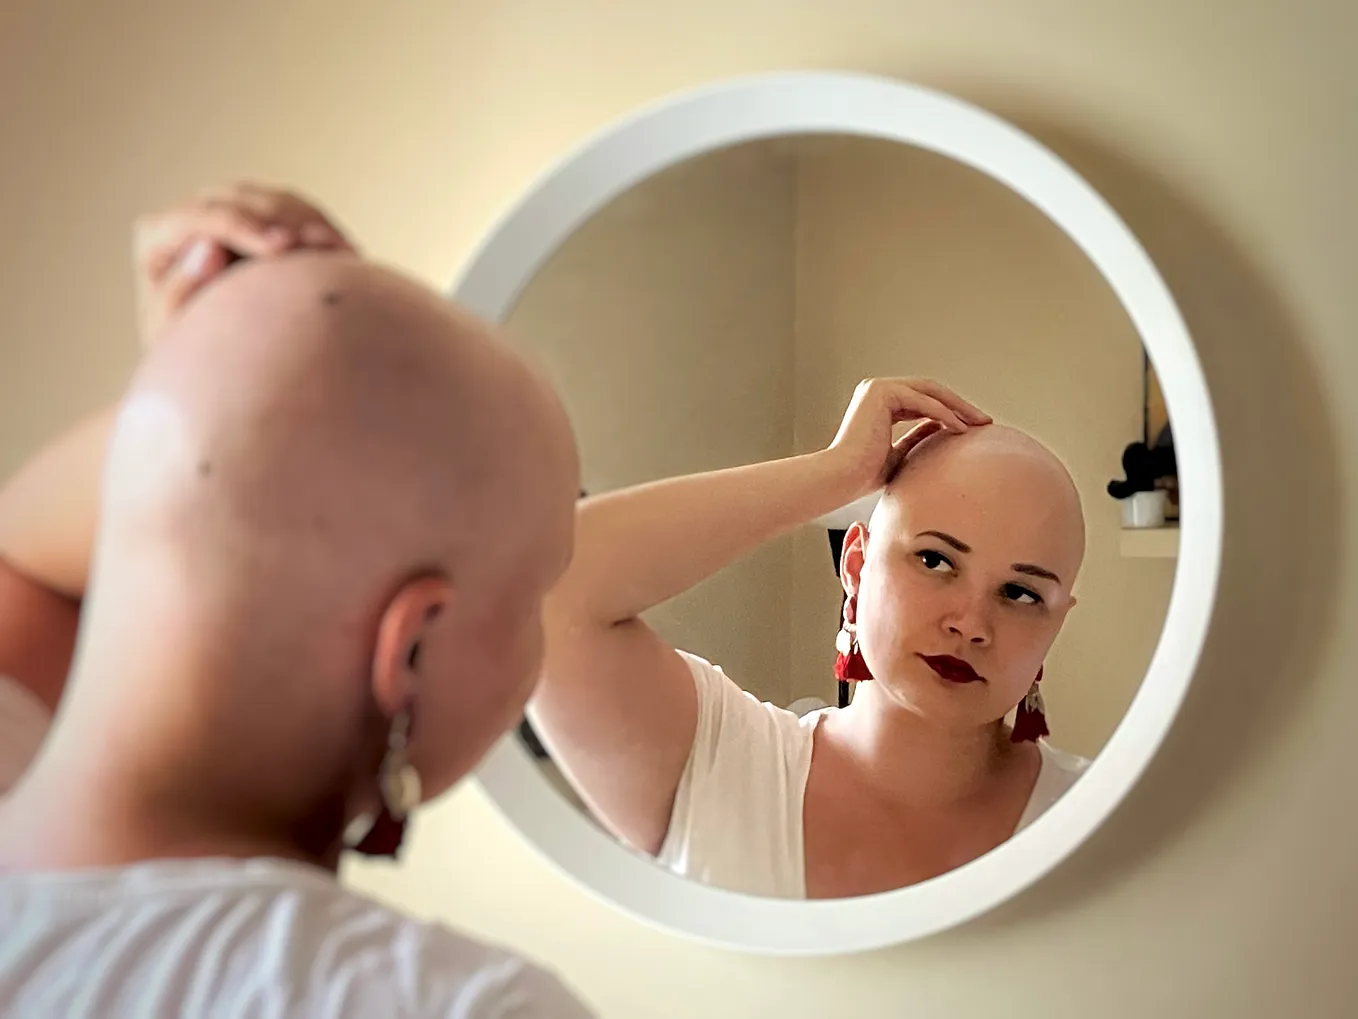 “It’s not just hair”: 3 women share their experience with hair loss